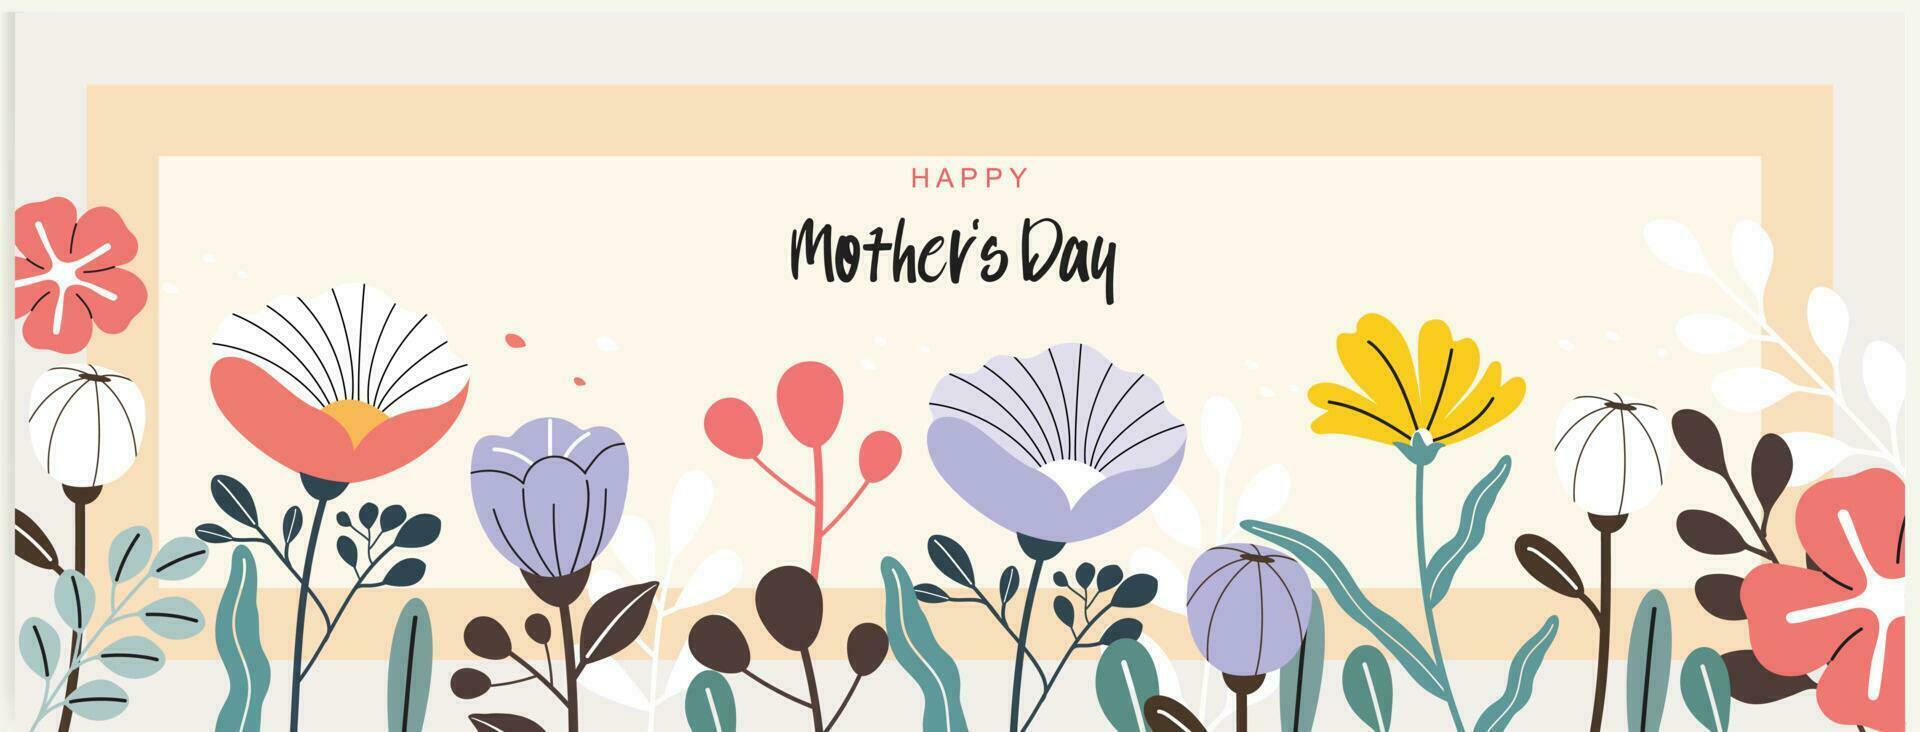 Mother's day banner, poster, greeting card, background design with beautiful blossom flowers. vector illustration.